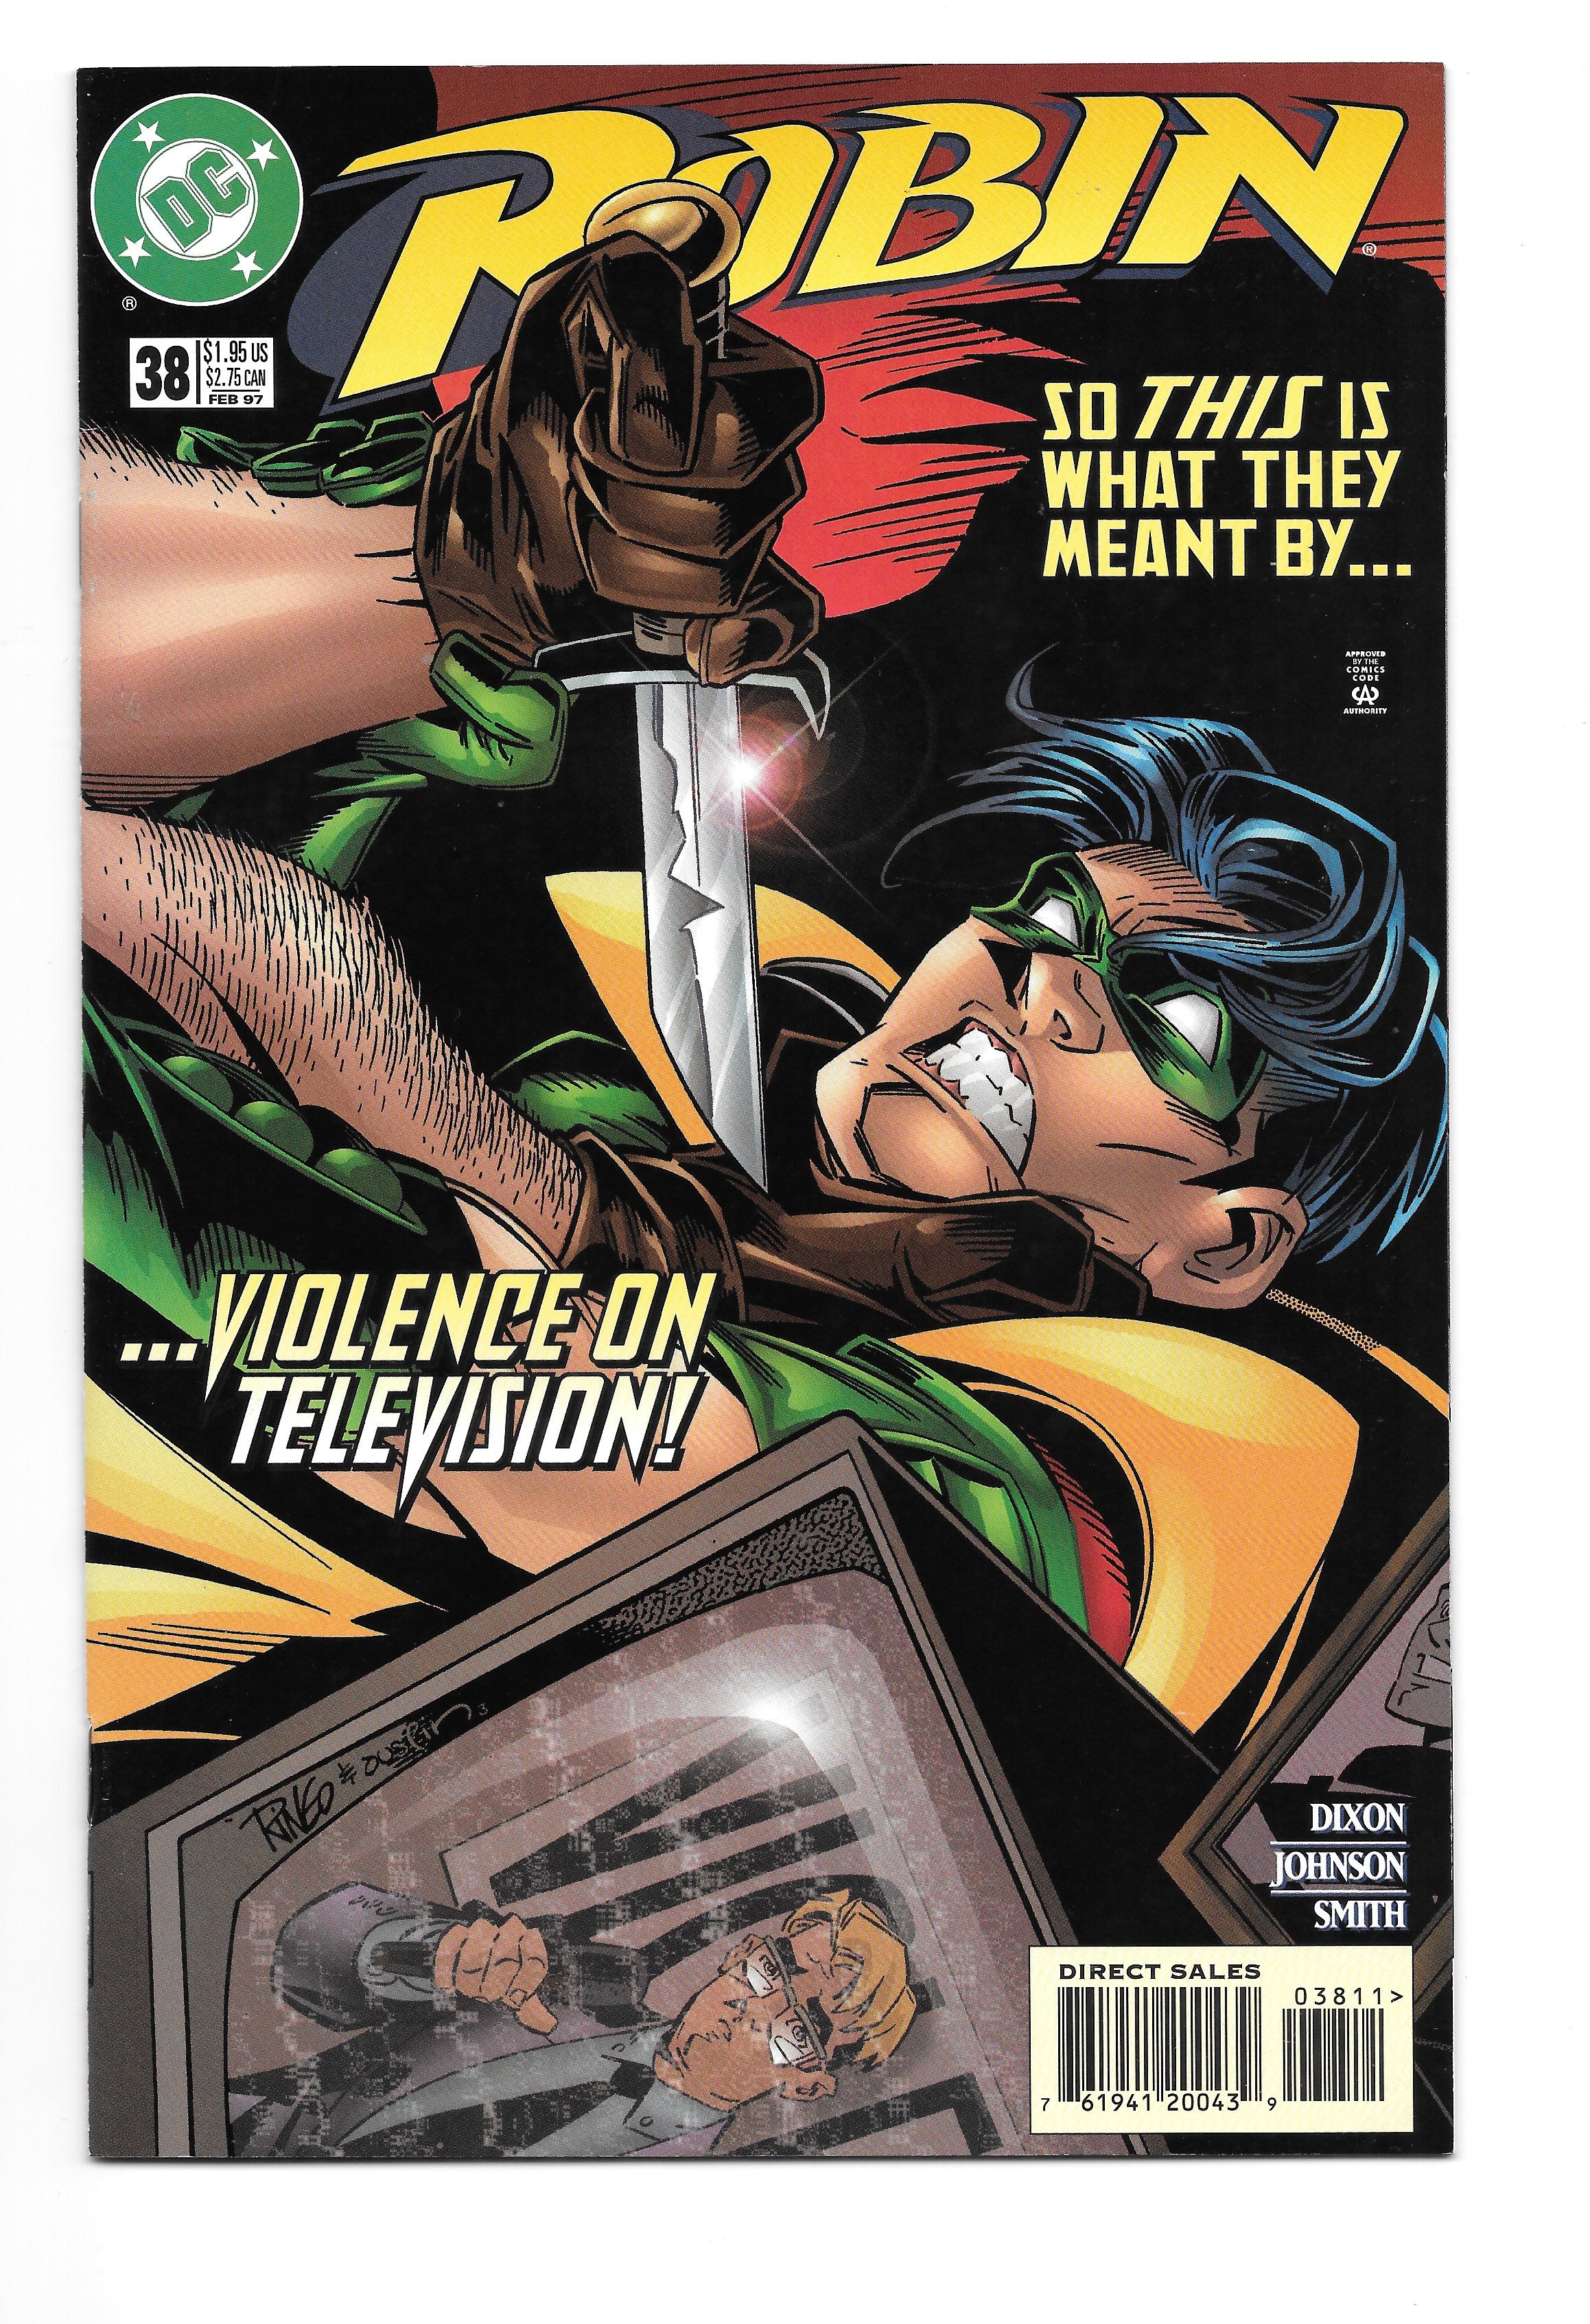 Photo of Robin, Vol. 2 (1997)  Iss 38   Comic sold by Stronghold Collectibles